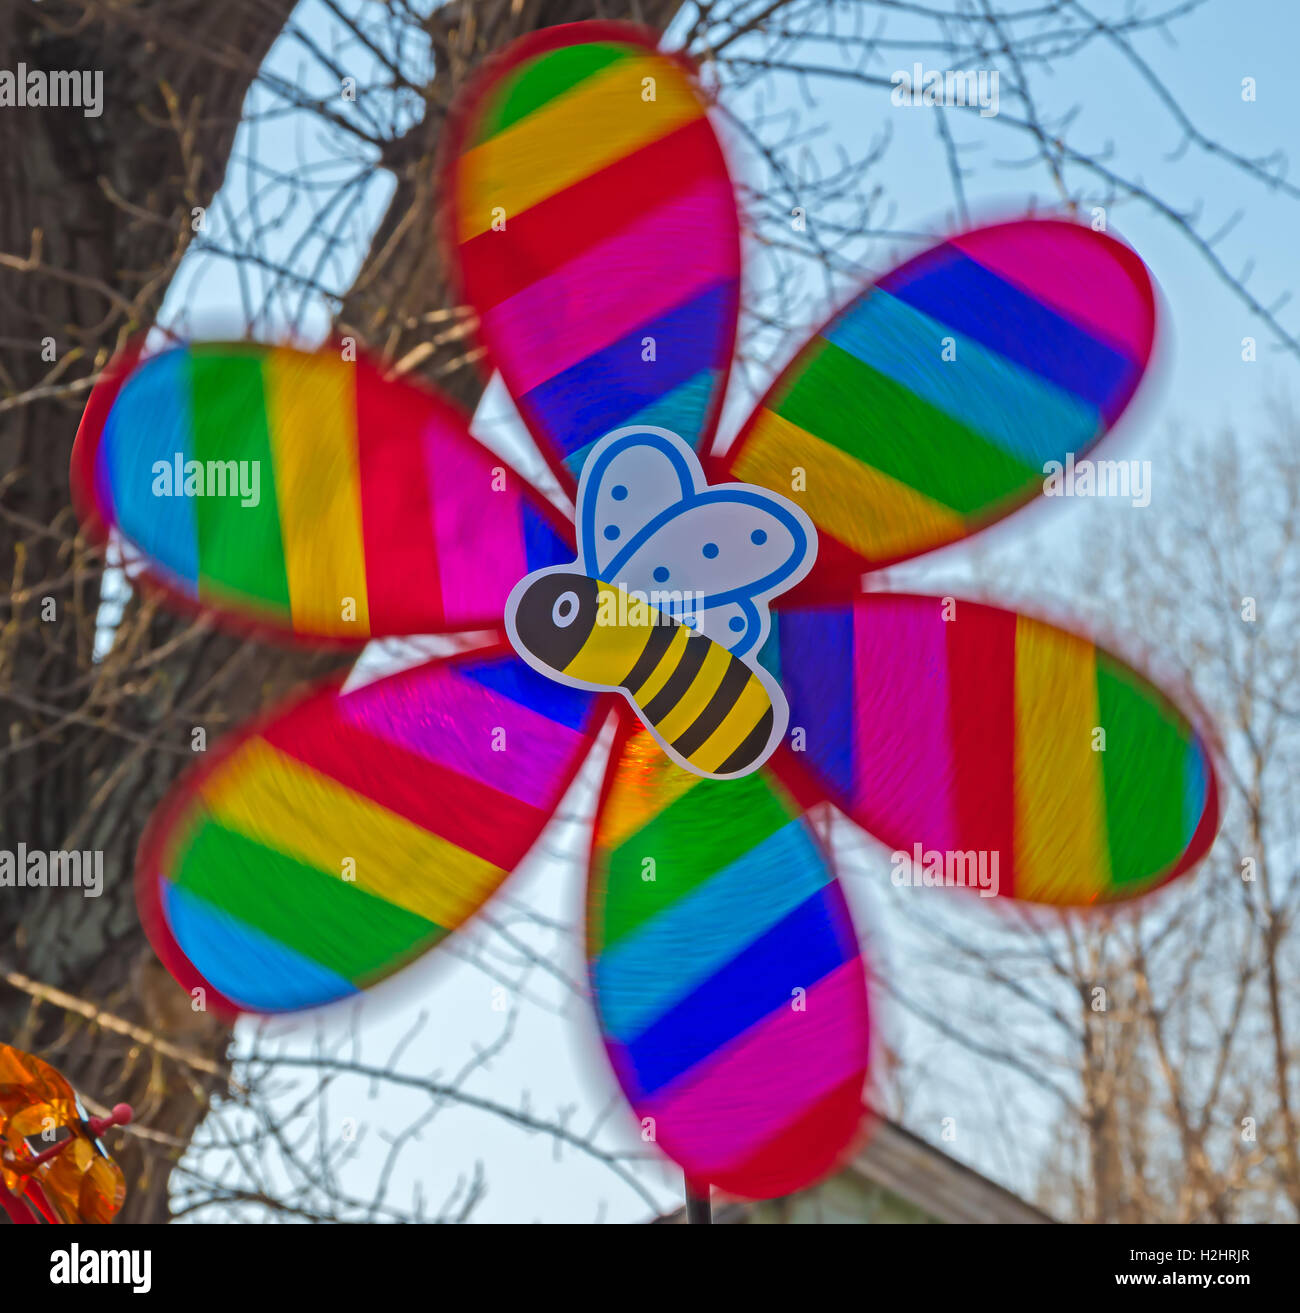 Children's multi-colored toy in the form of a propeller and bee in motion Stock Photo